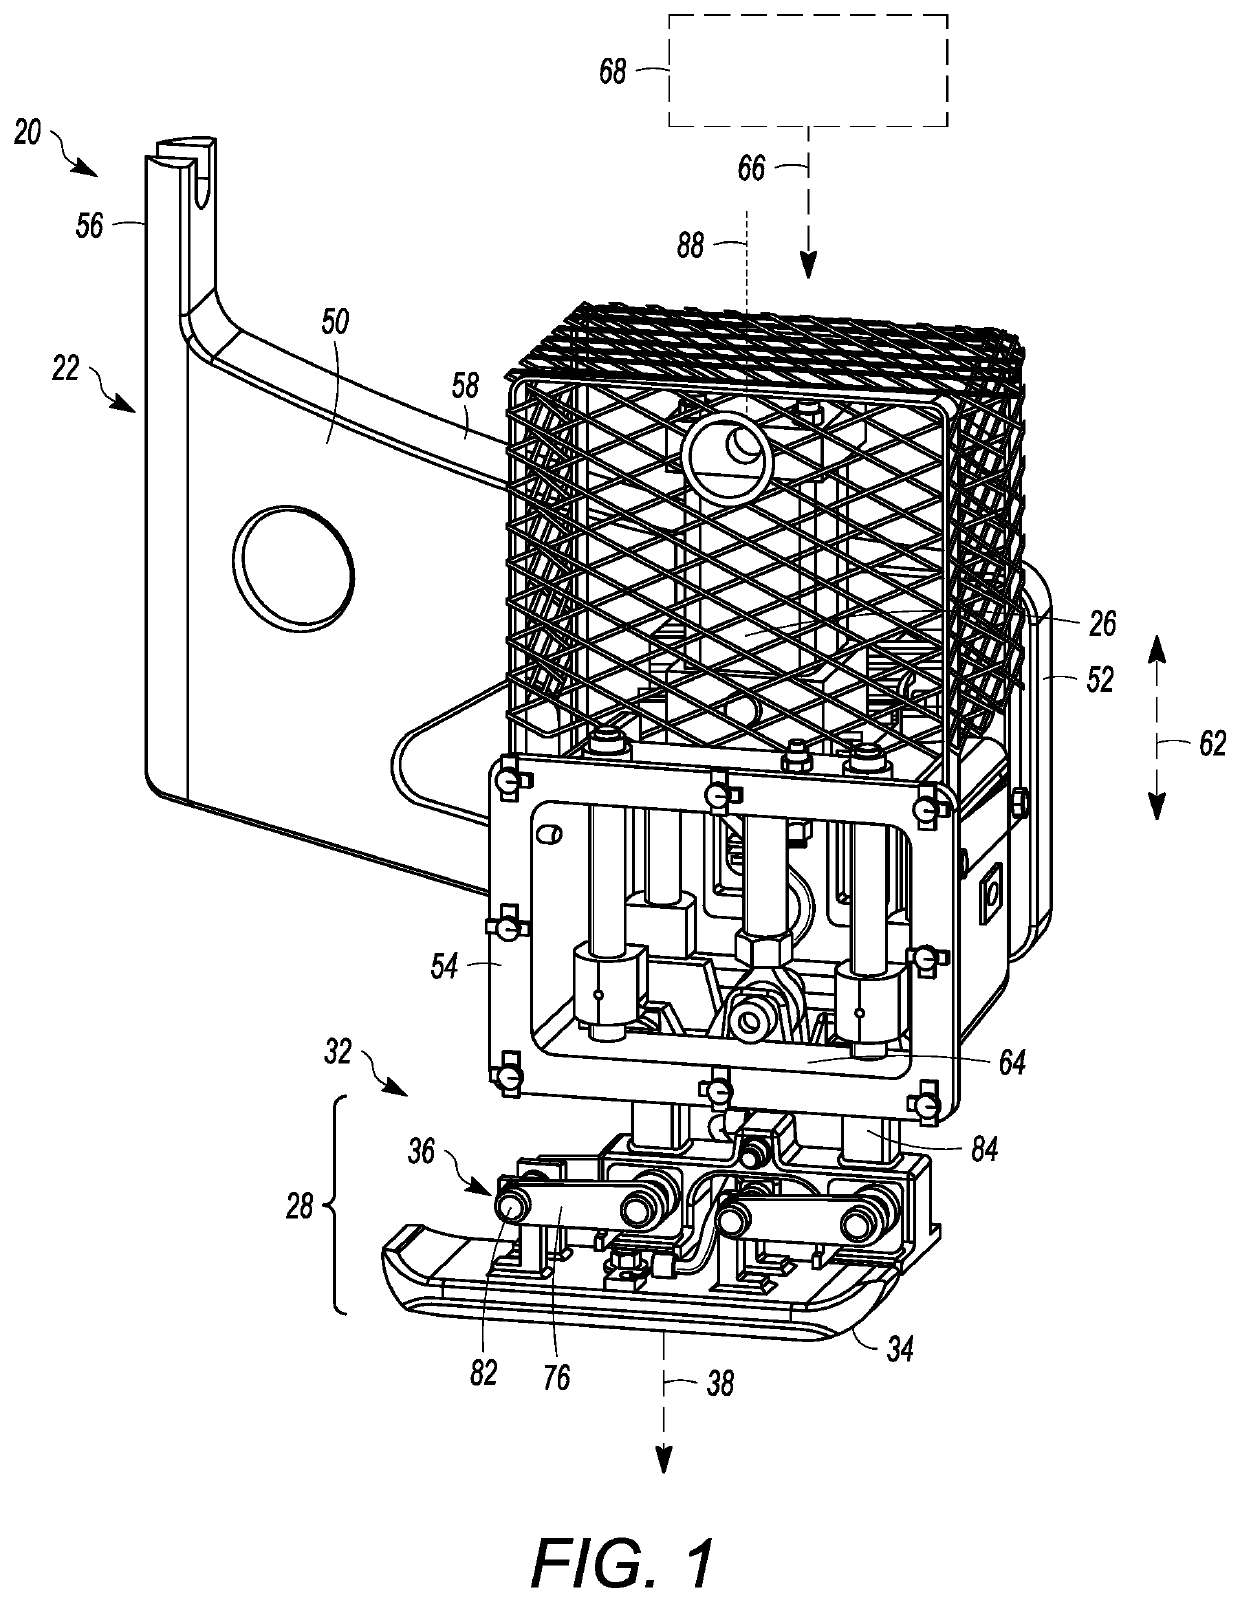 Electrical shunt apparatus and system